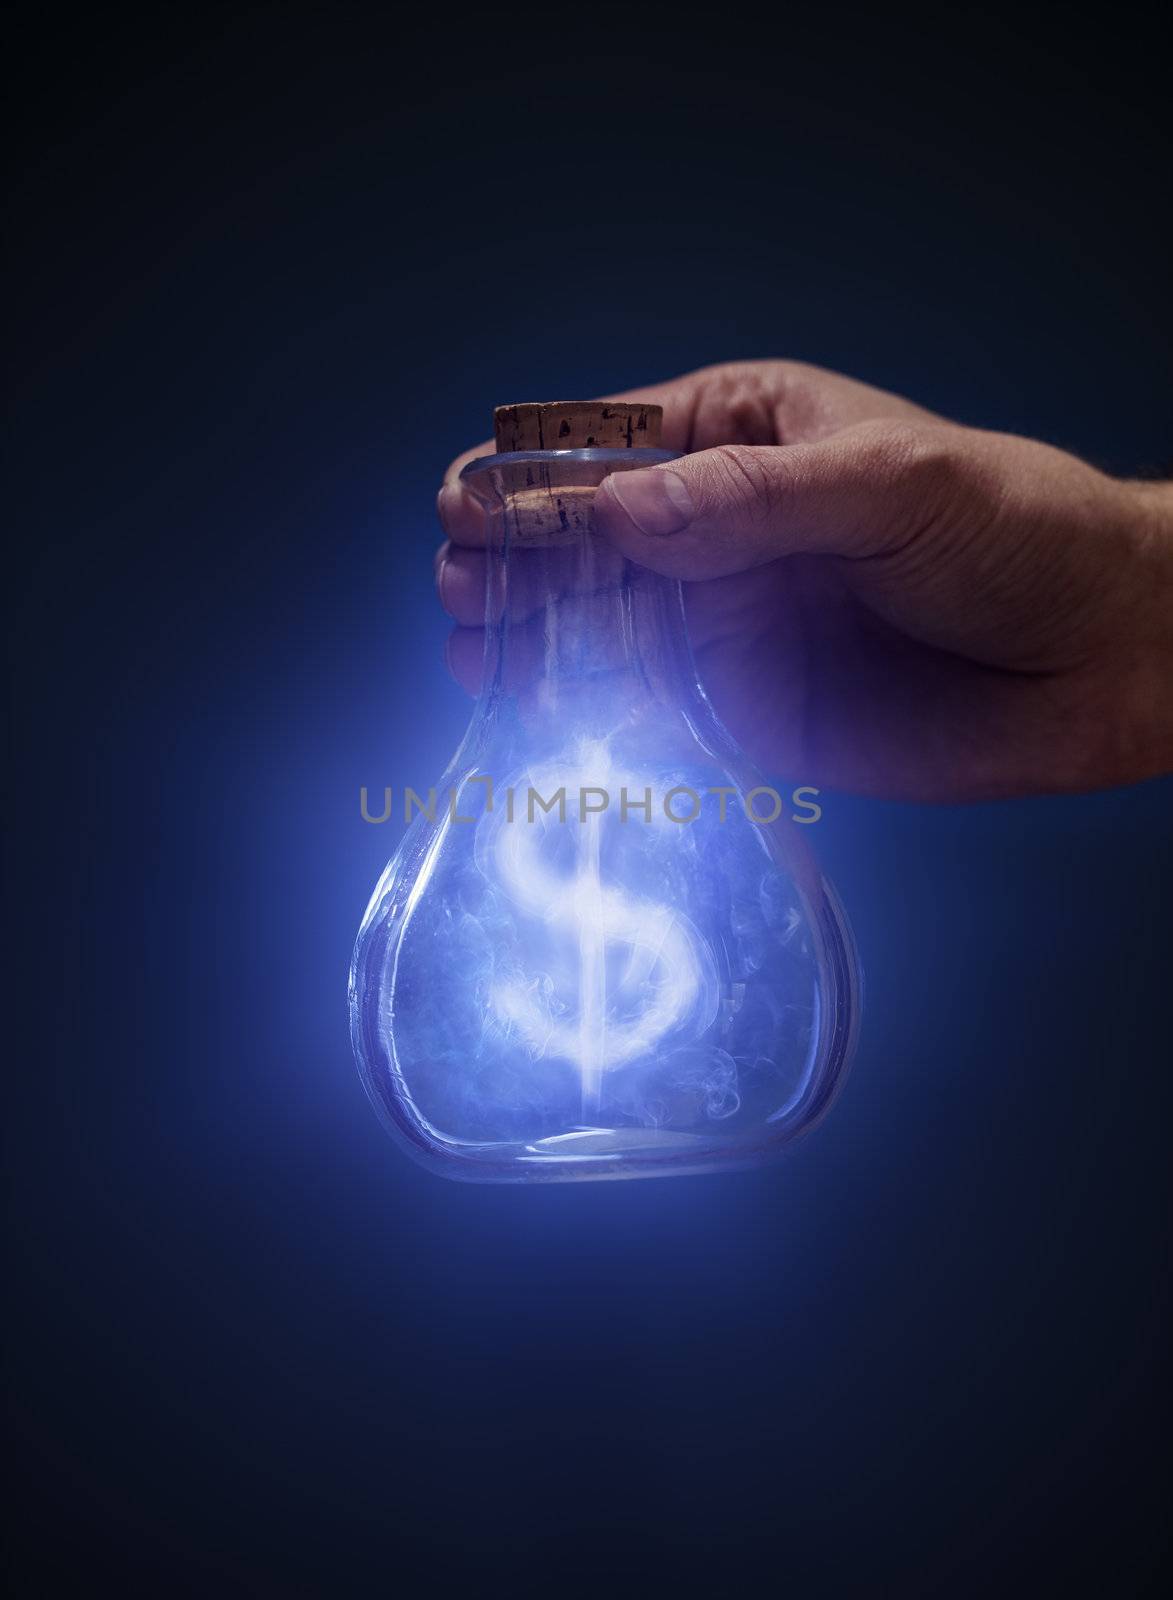 Conceptual image of a hand holding an old bottle containing a dollar sign made of smoke.